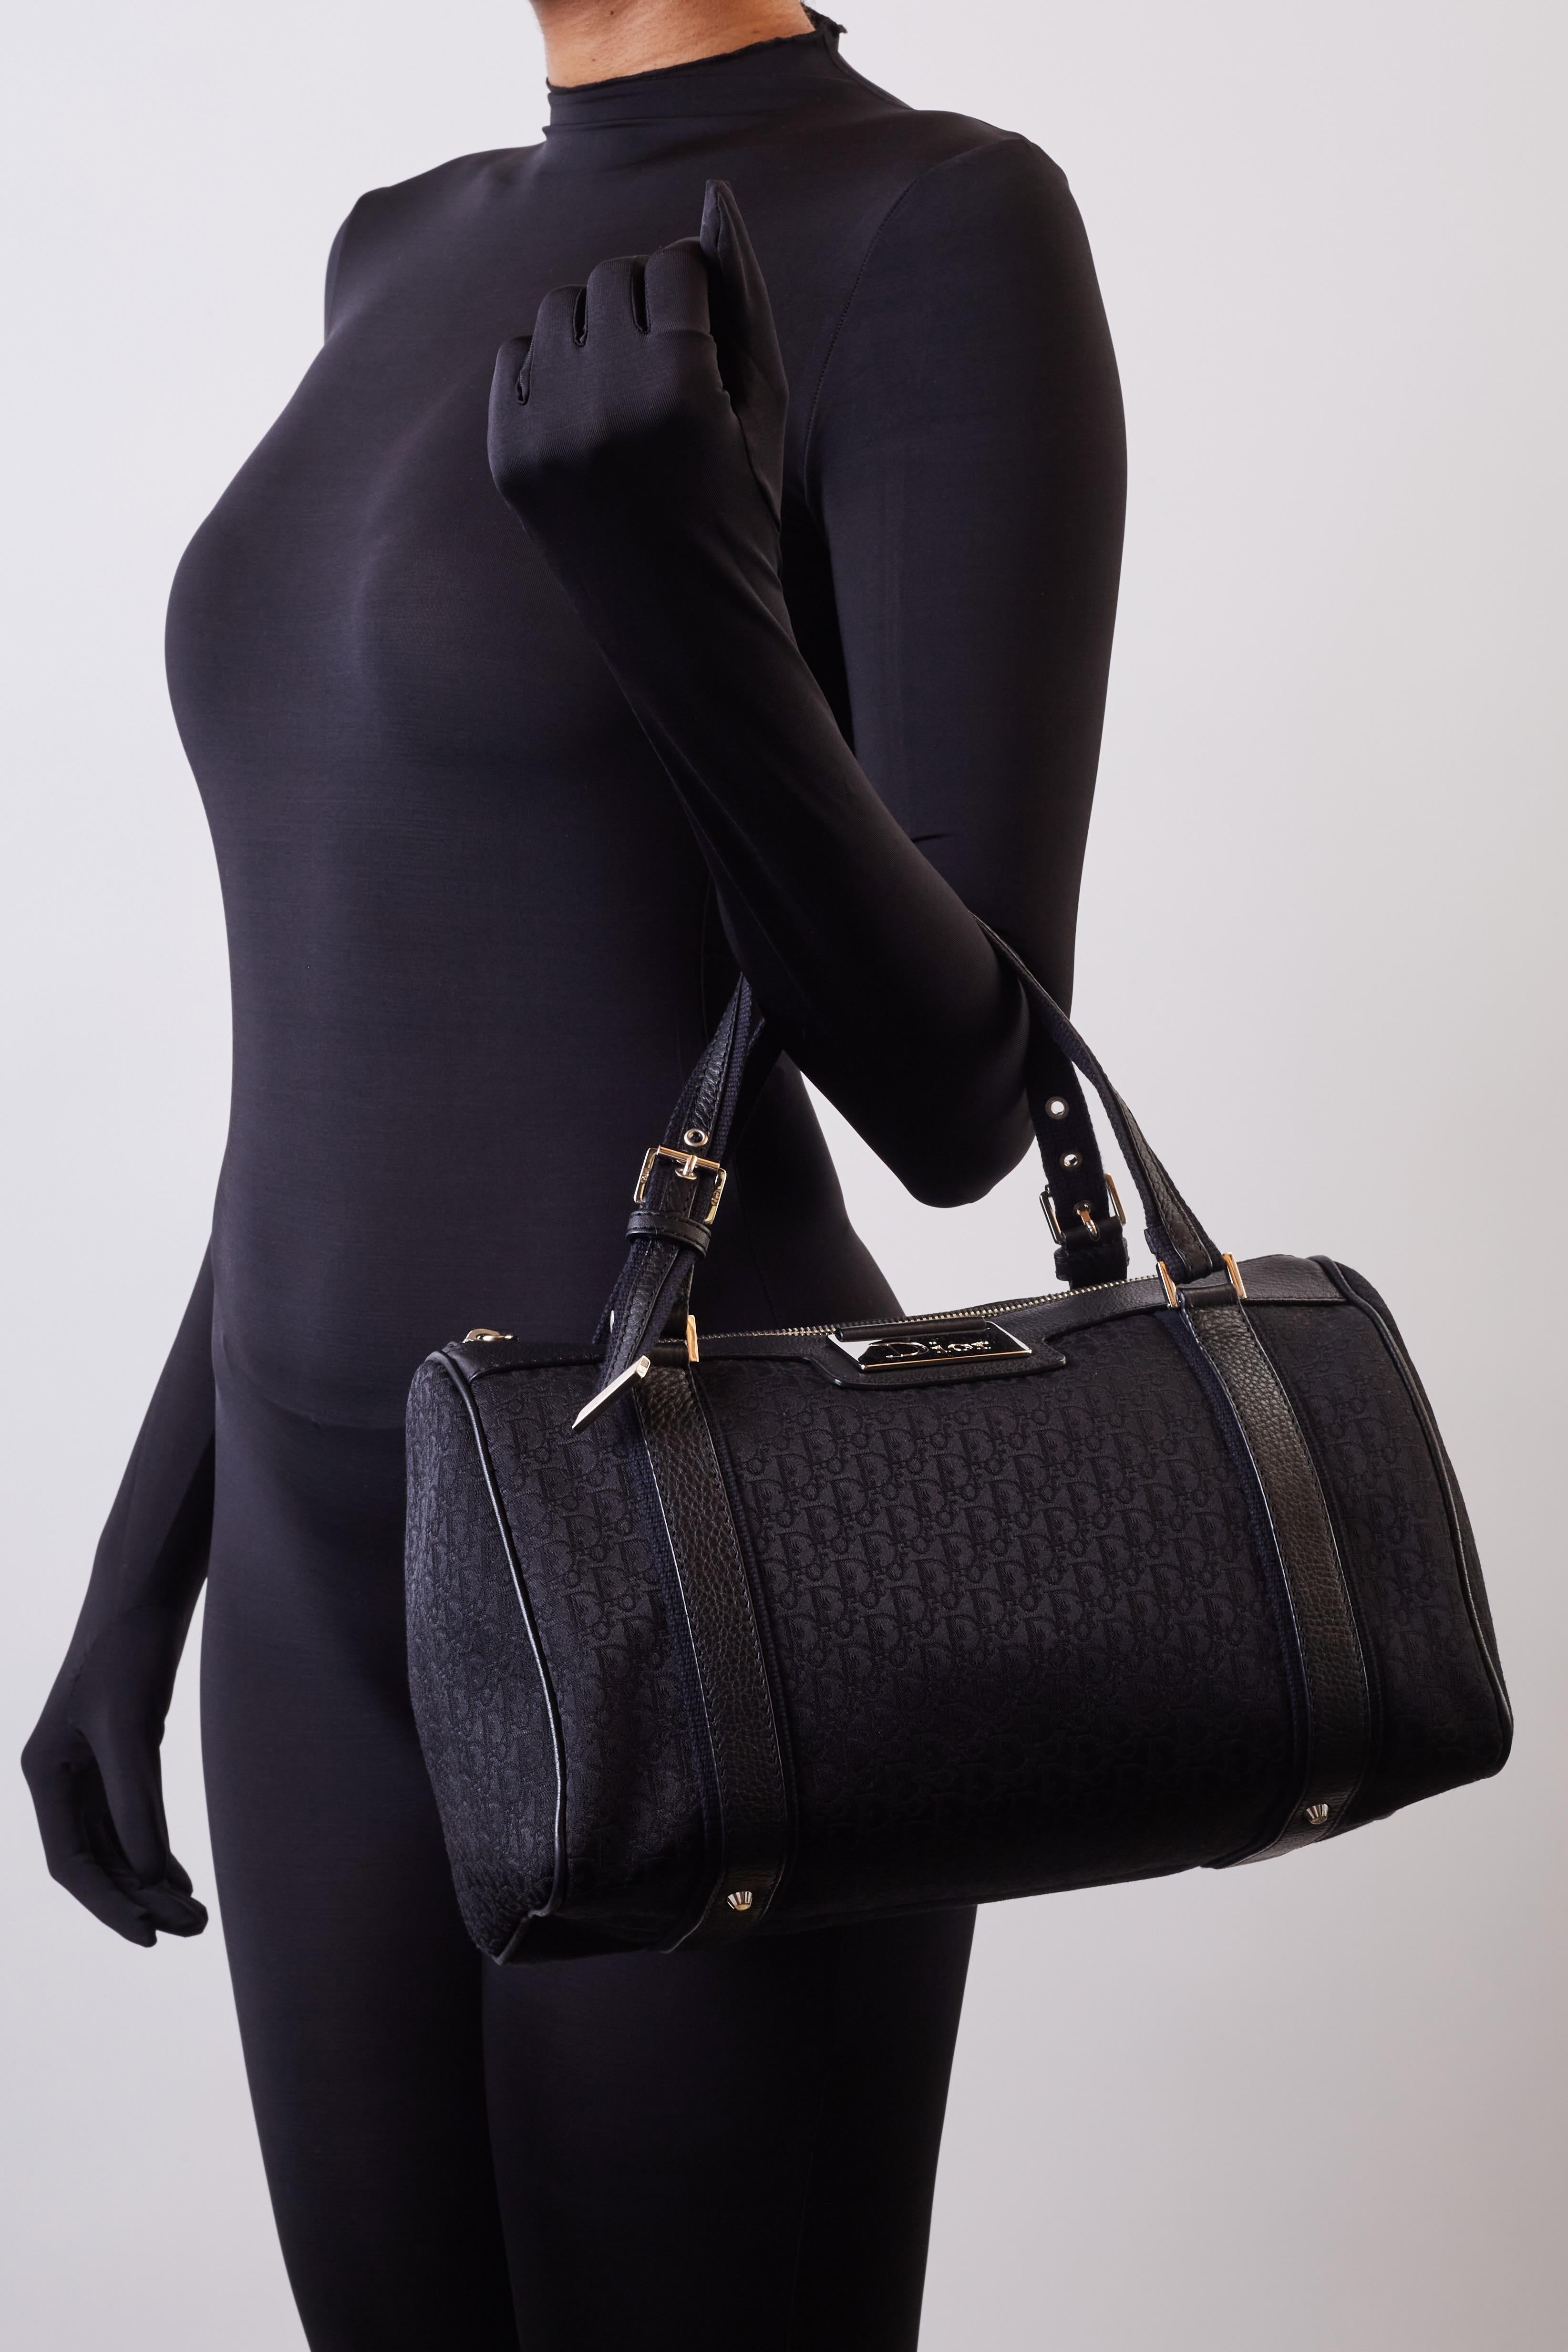 This Dior Boston 35 bag in black oblique monogram print measures 30 cm (12 inches) and is constructed of canvas with leather details and finishes. The bag is part of Galliano’s street chic collection, 2006. The bag features dual flat woven fabric